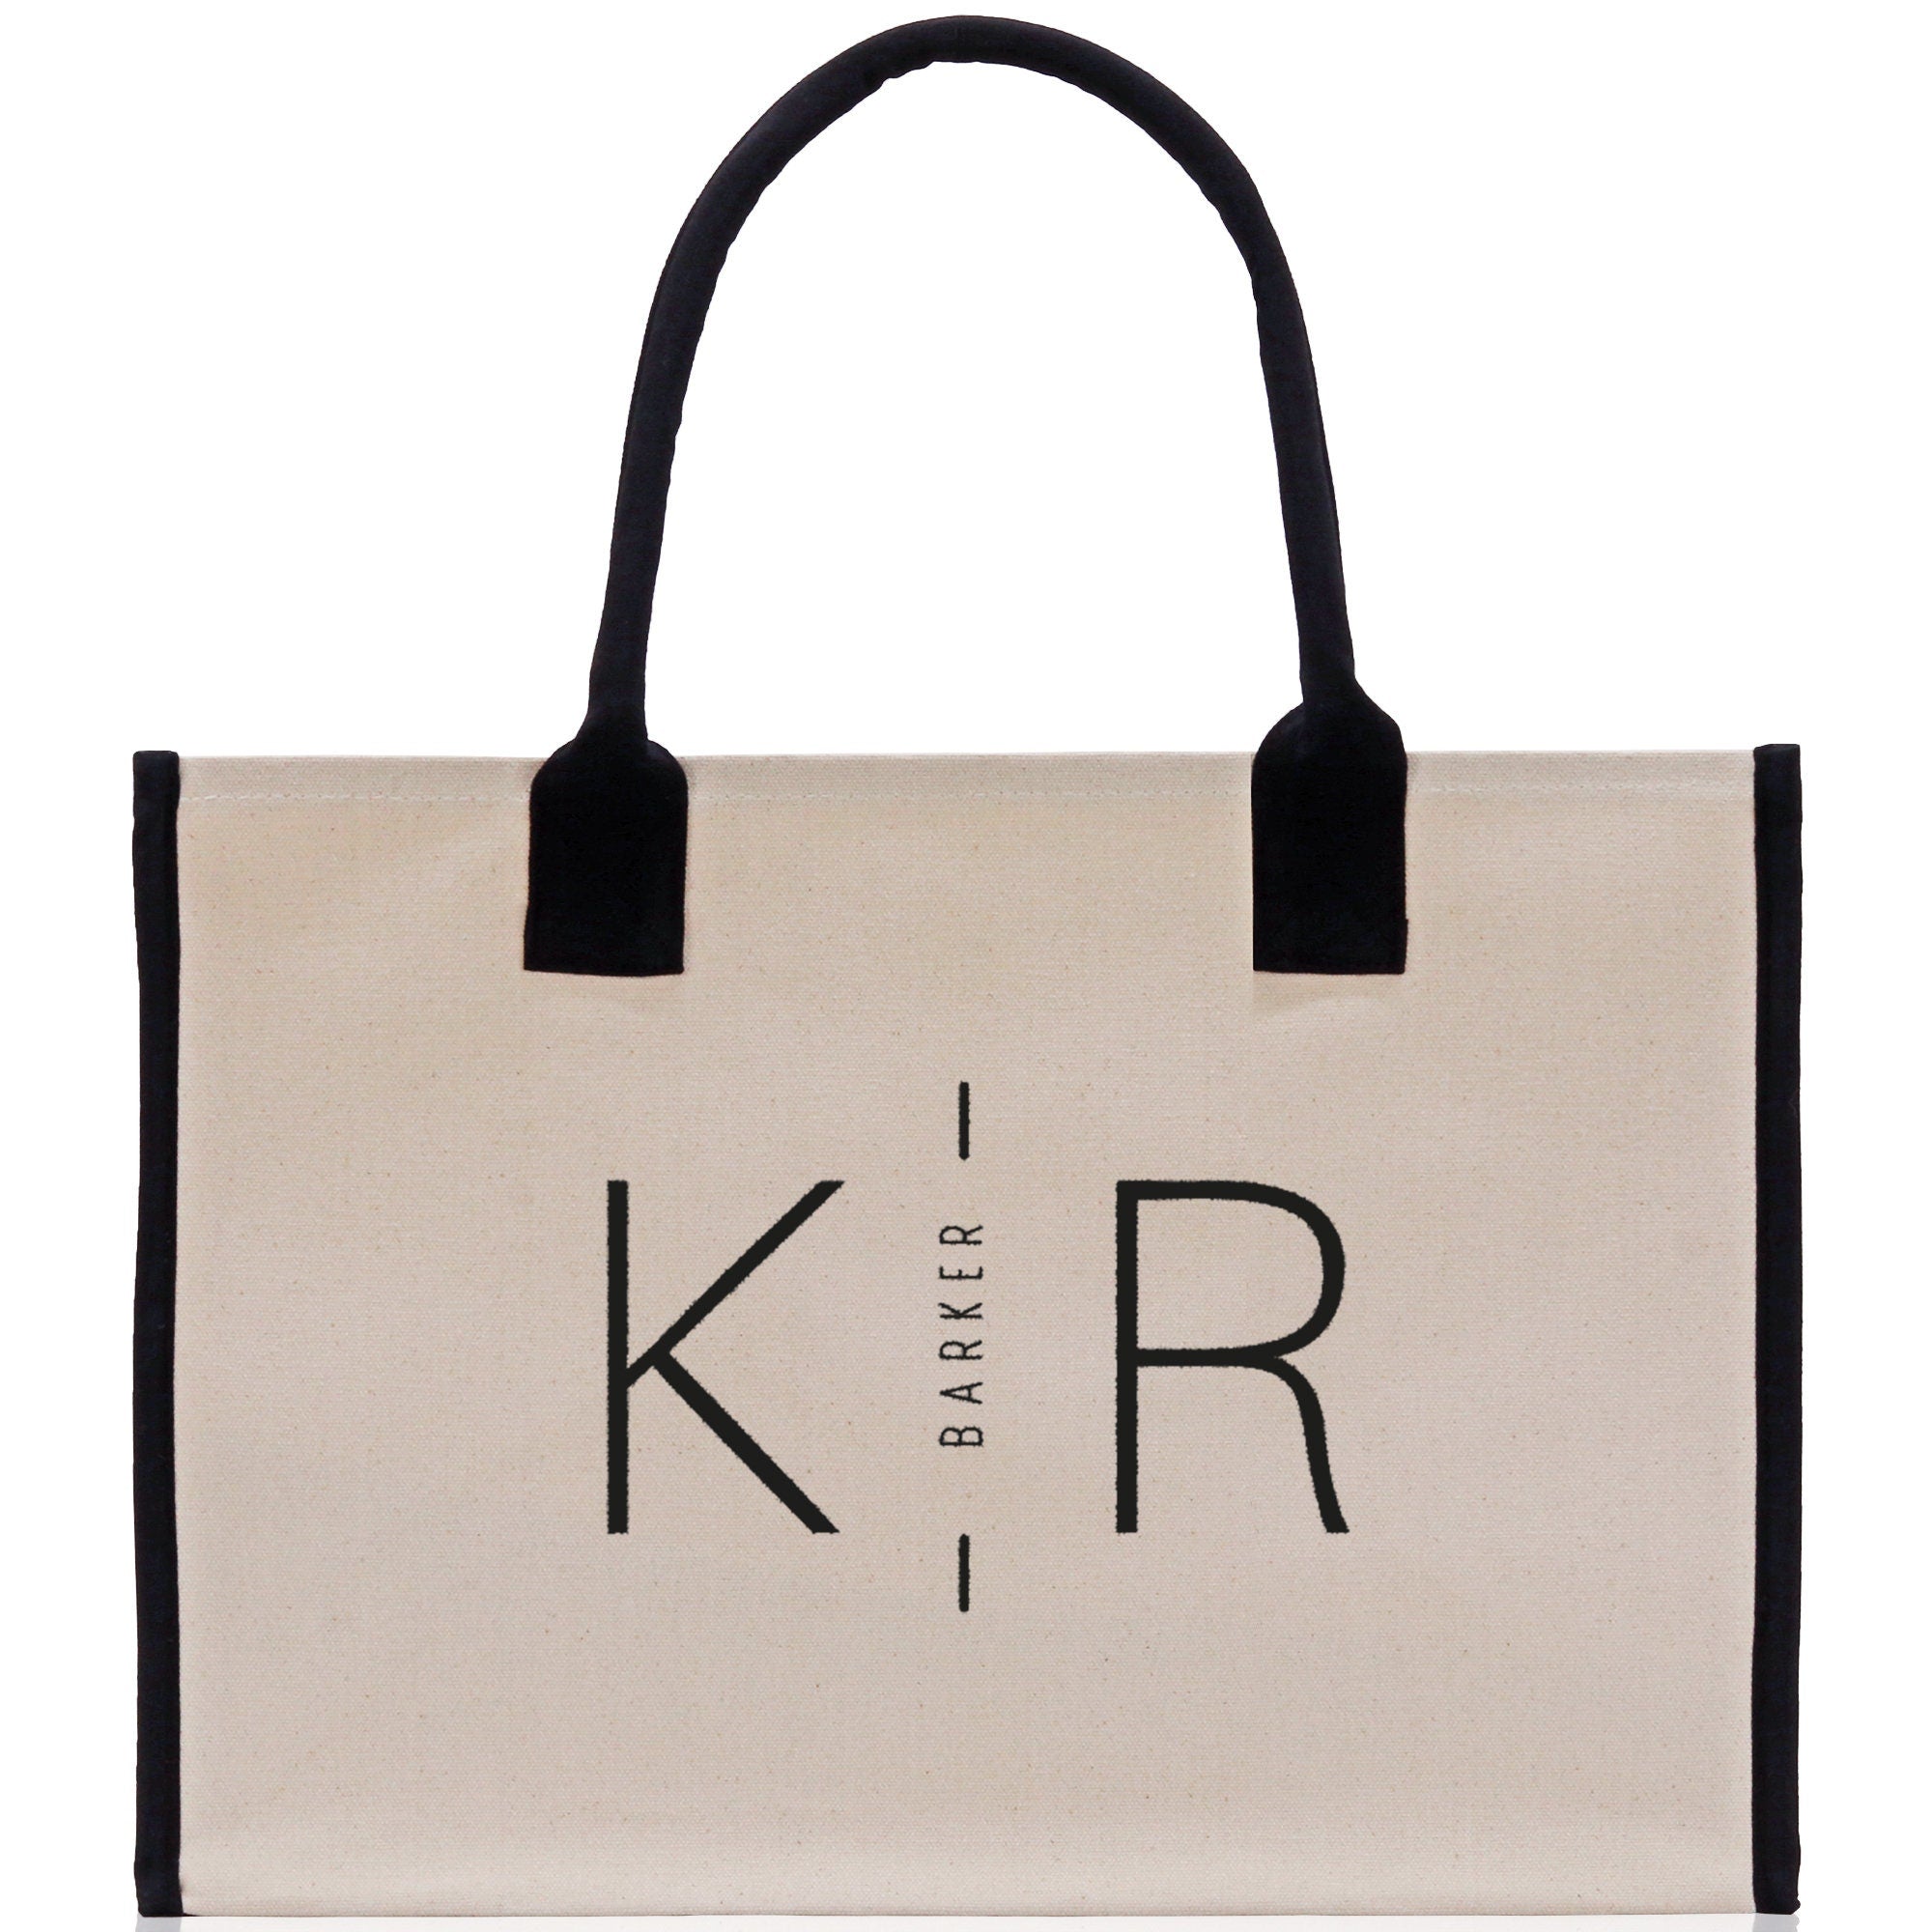 Initials and Last Name Customized Embroidered Tote Bag 100% Cotton Canvas Chic Personalized Tote Bag for Bridesmaid Anniversary Wedding Day